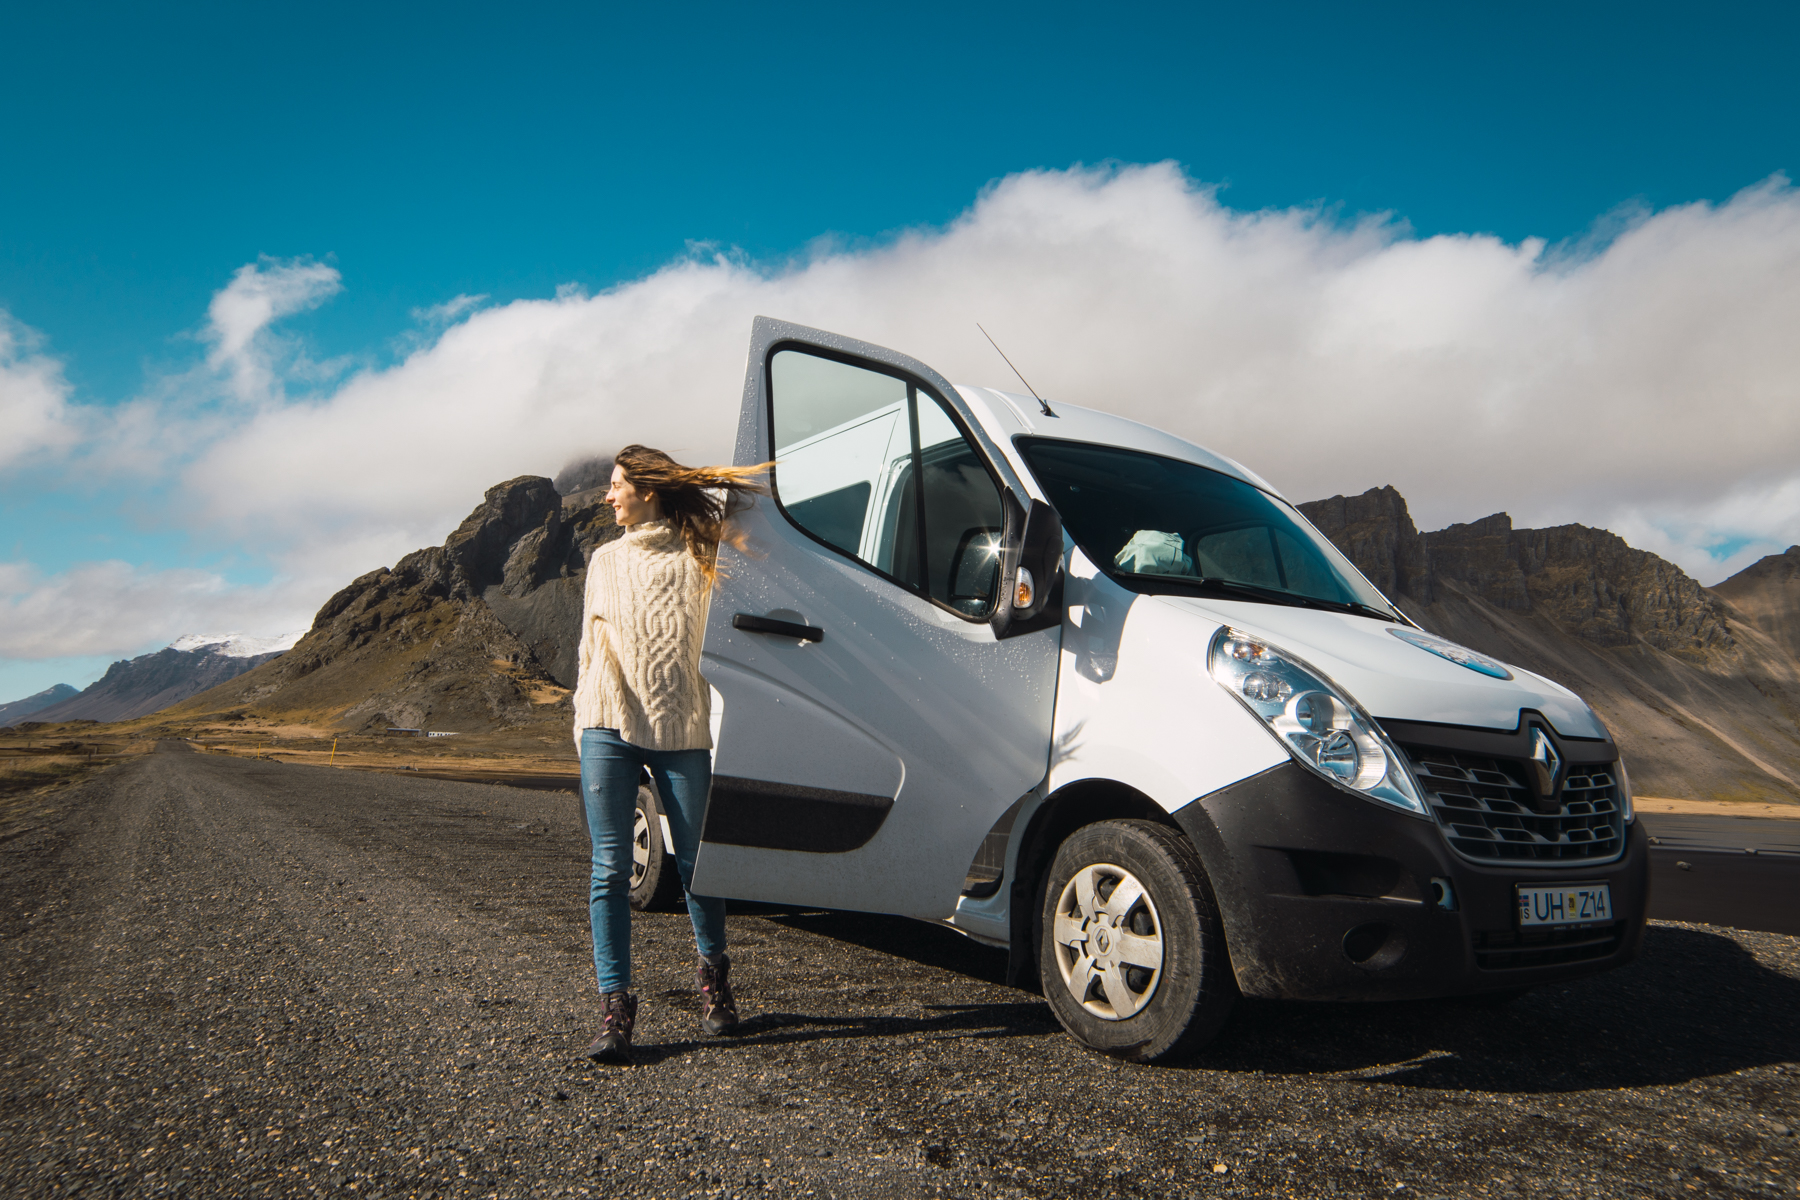 Kuku Campers your campervan rental in Iceland. Enjoy your self drive adventure in Iceland. Road and Off-Road 4x4 campervans.